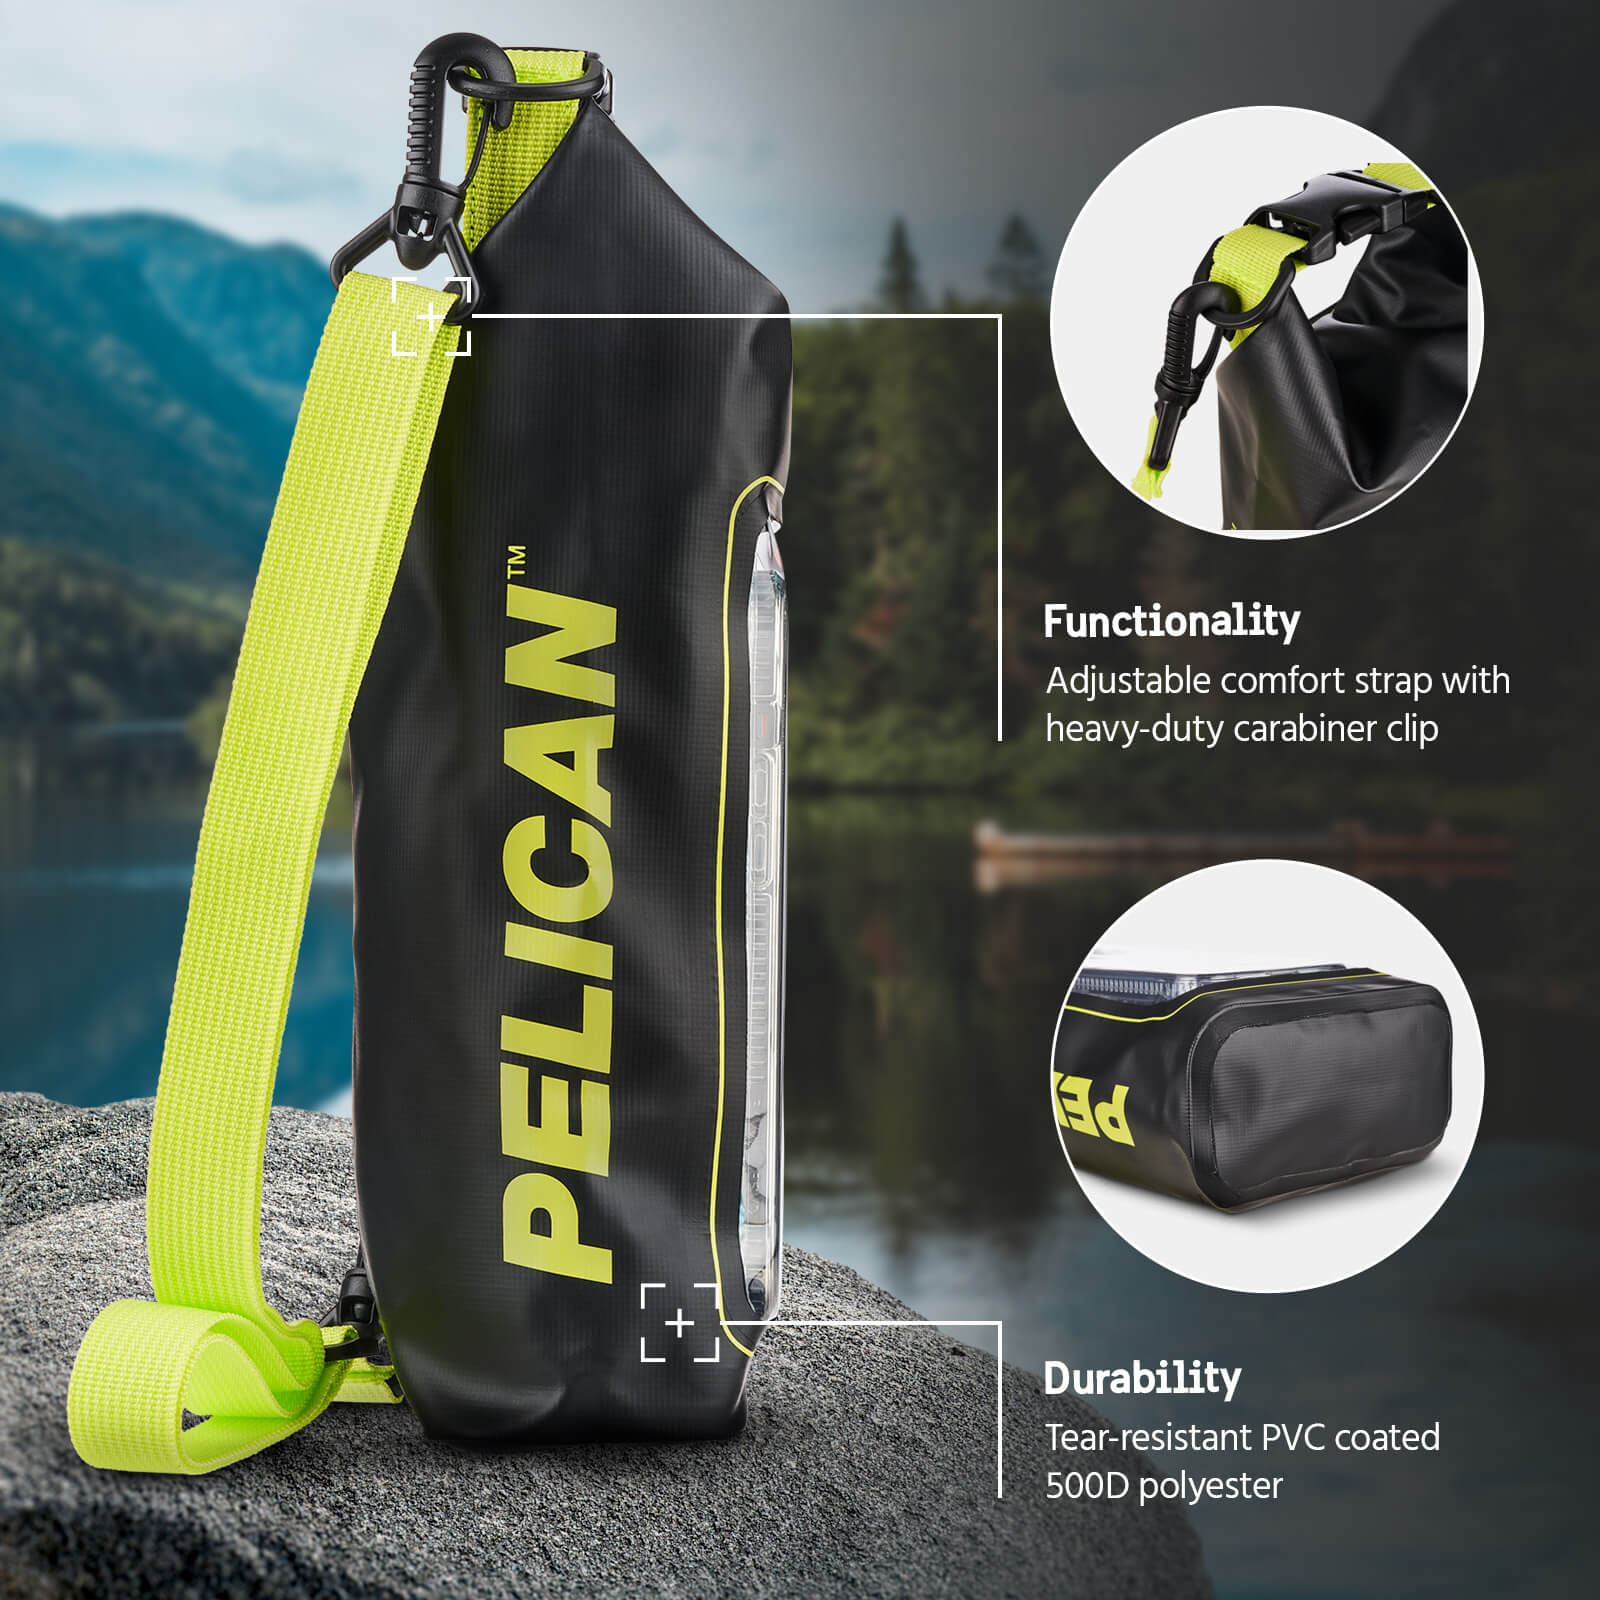 Pelican Marine Waterproof Phone Dry Bag 1P66 Water Resistant. Full Protection against dust, dirt, and other environmental elements. color::Black/ Hi Vis Yellow